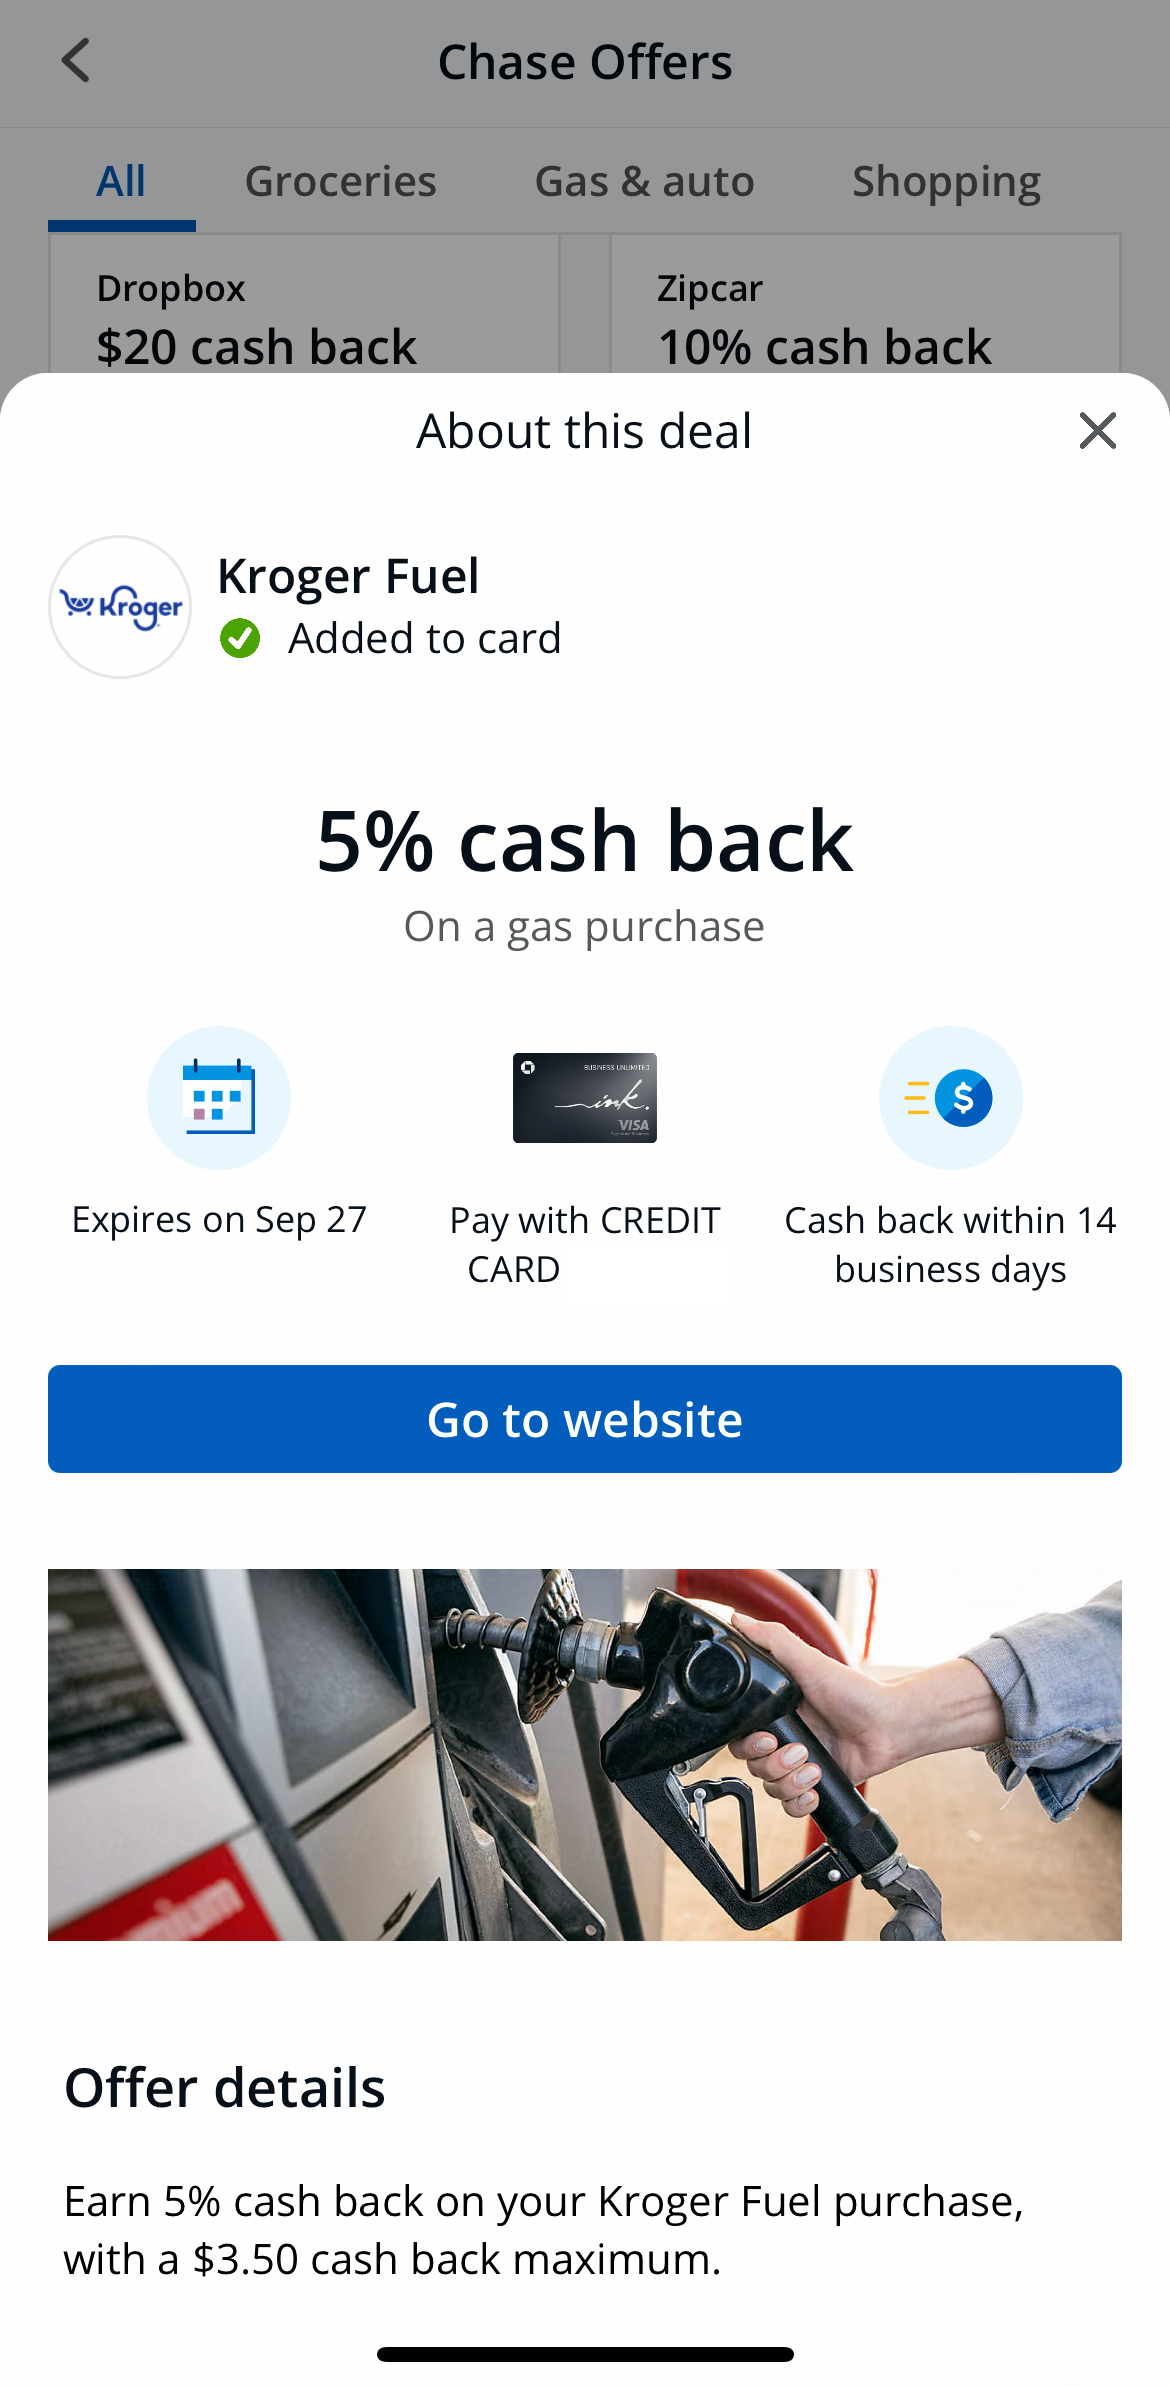 Chase Offer Confirmation on mobile app